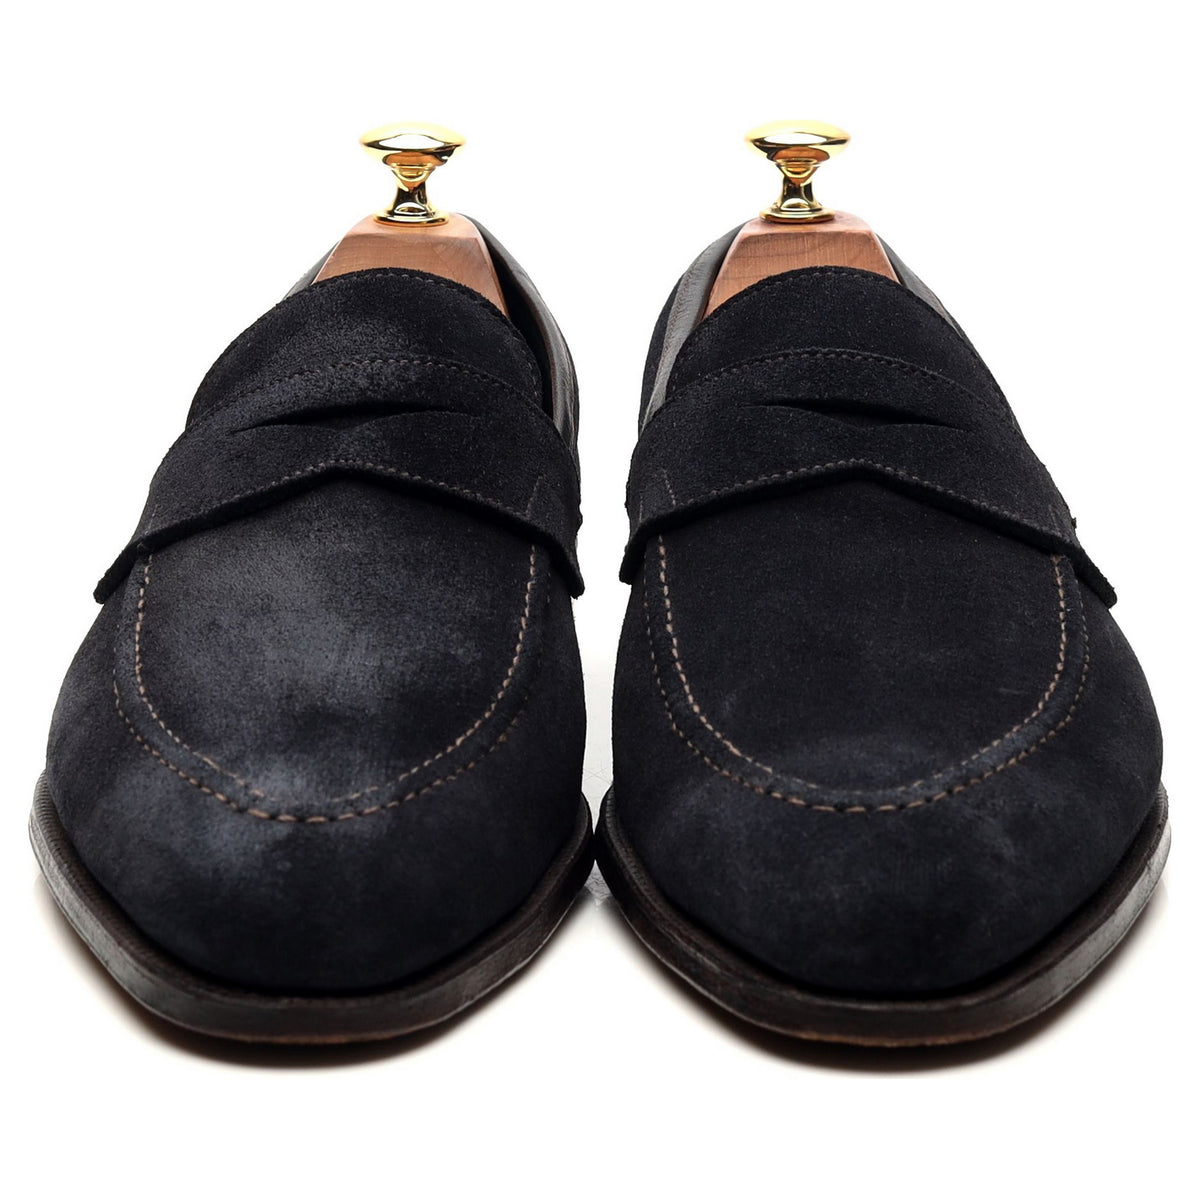 &#39;Teign&#39; Navy Blue Suede Loafers UK 9 E